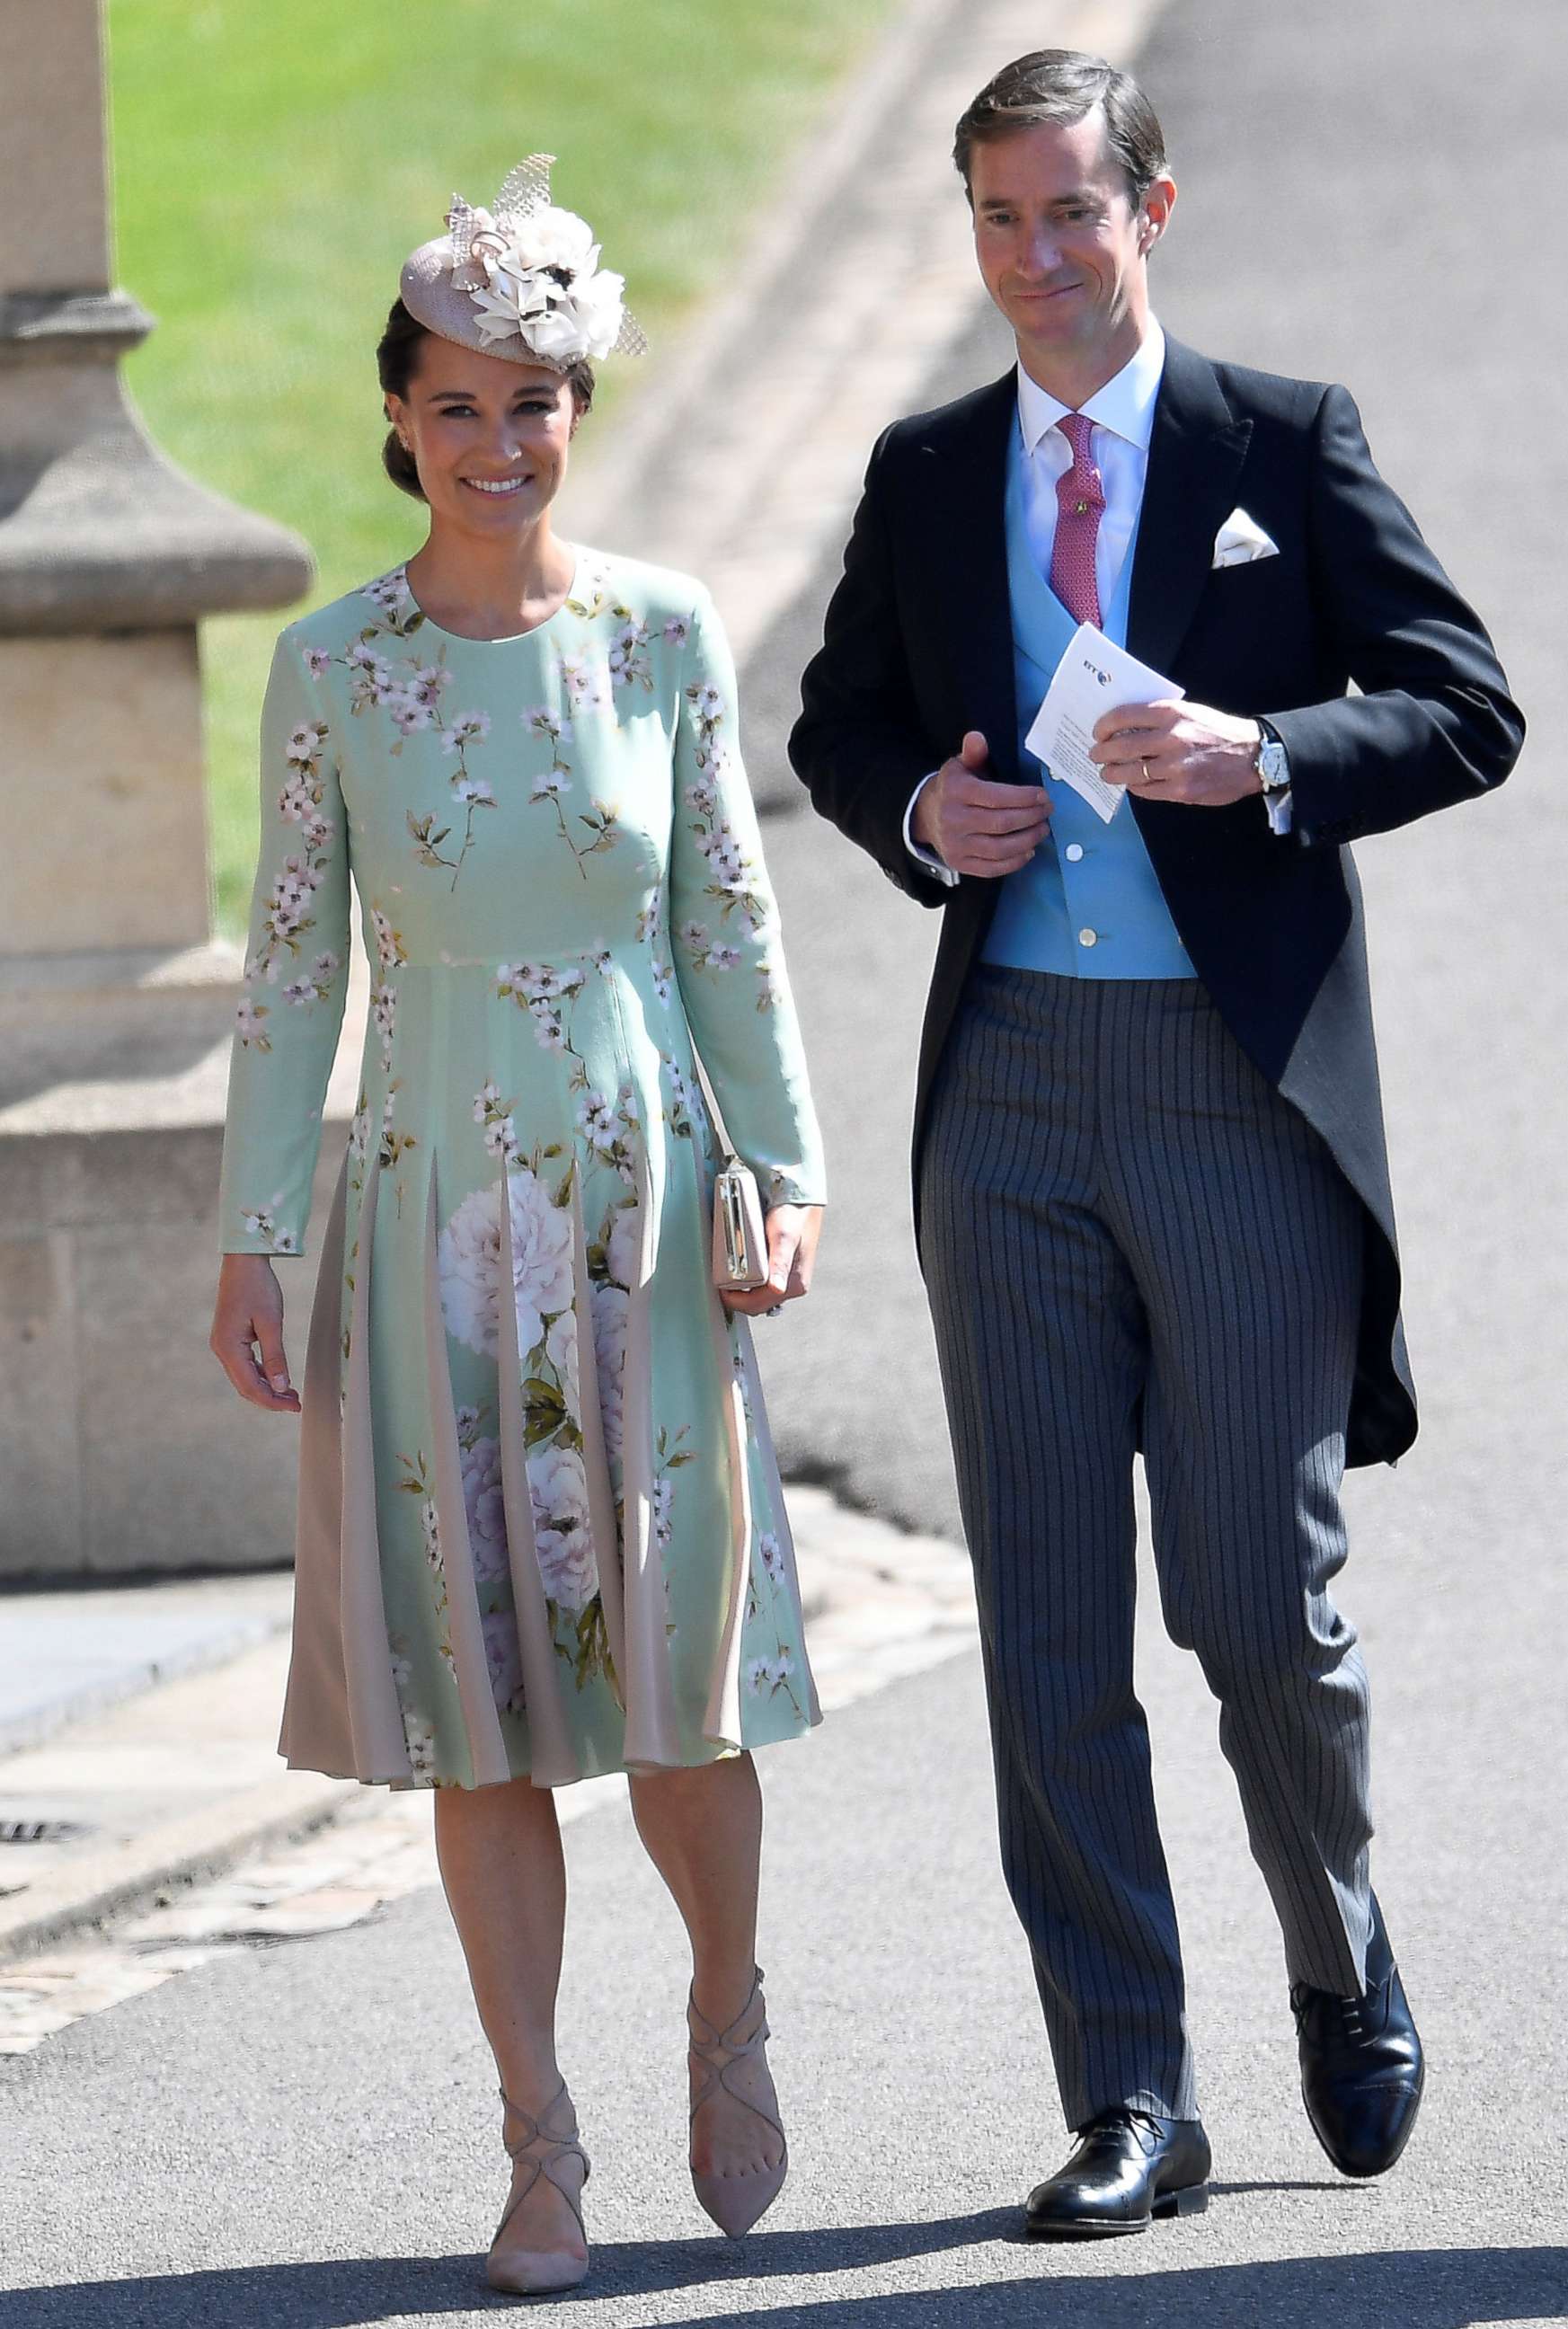 PHOTO: Pippa Middleton arrives with her husband James Matthews to the wedding of Prince Harry and Meghan Markle in Windsor, May 19, 2018. 